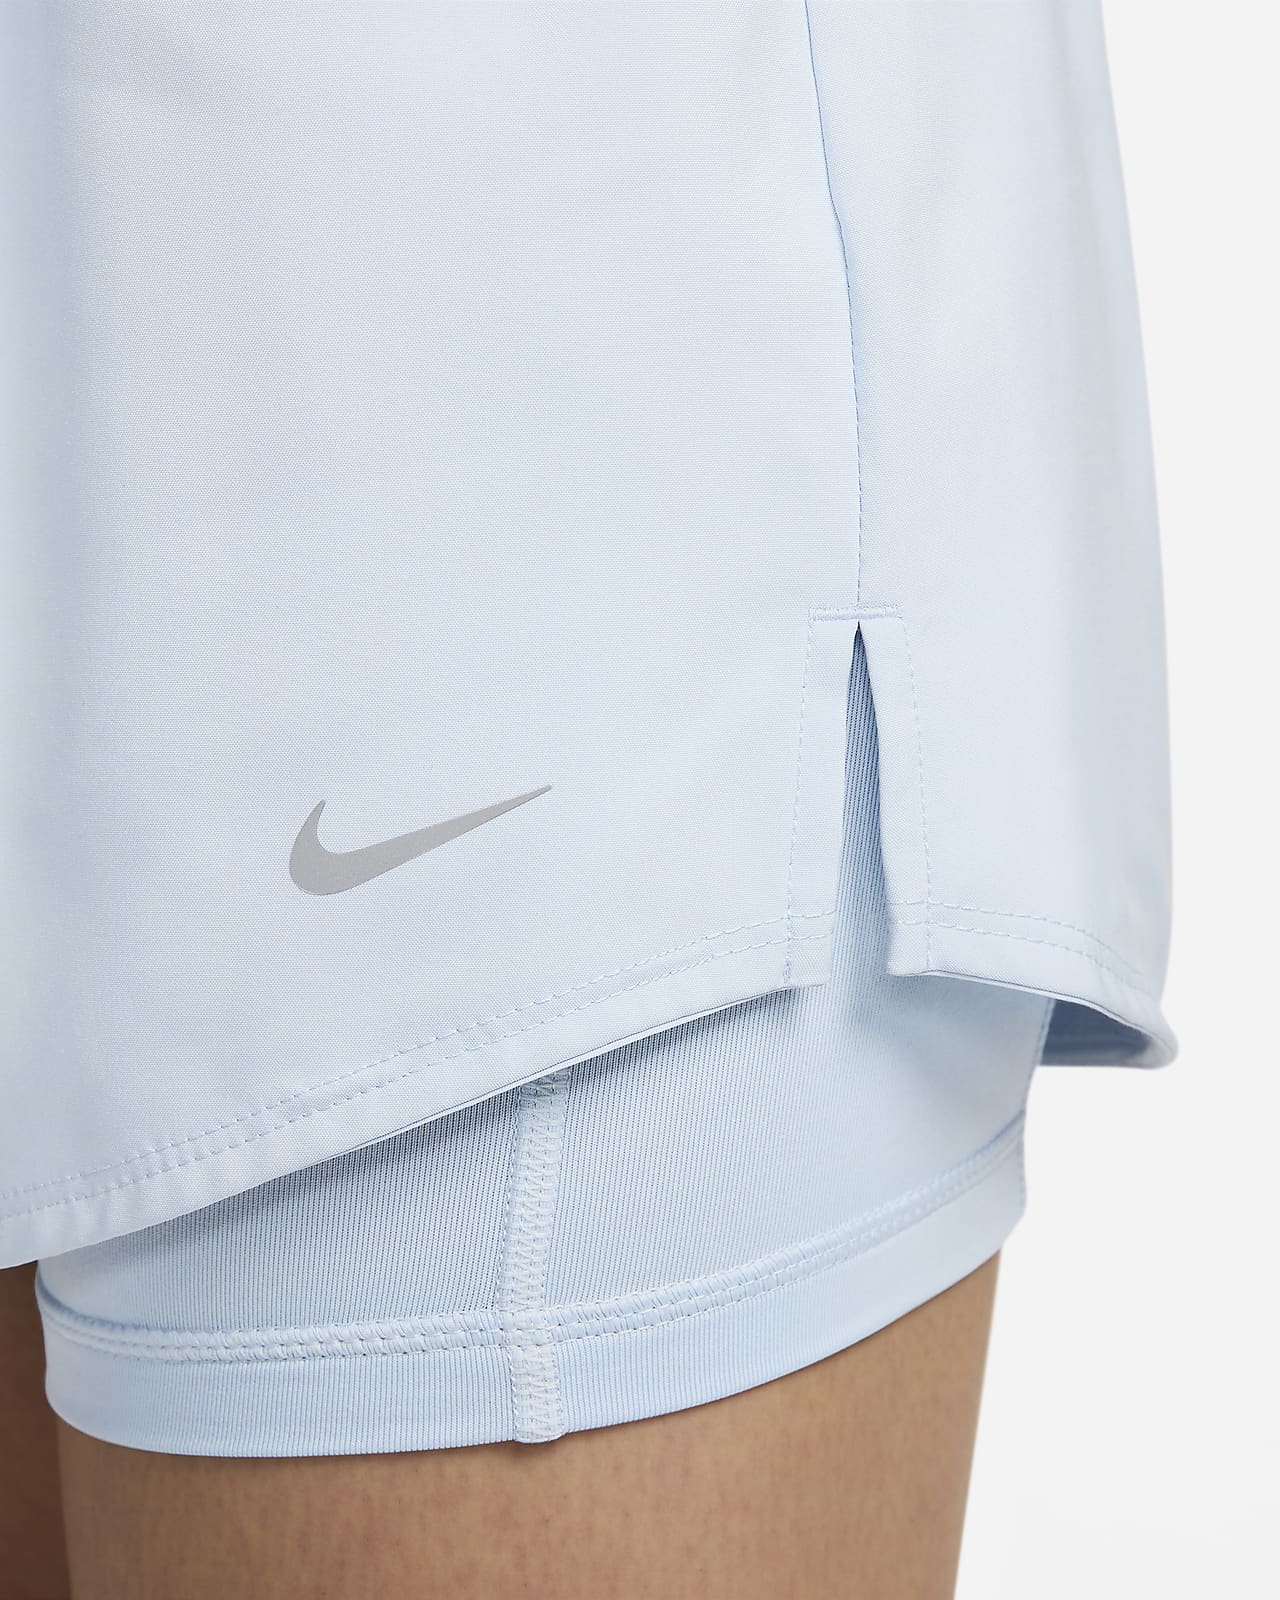 Nike One Women's Dri-FIT Mid-Rise 8cm (approx.) 2-in-1 Shorts. Nike IL